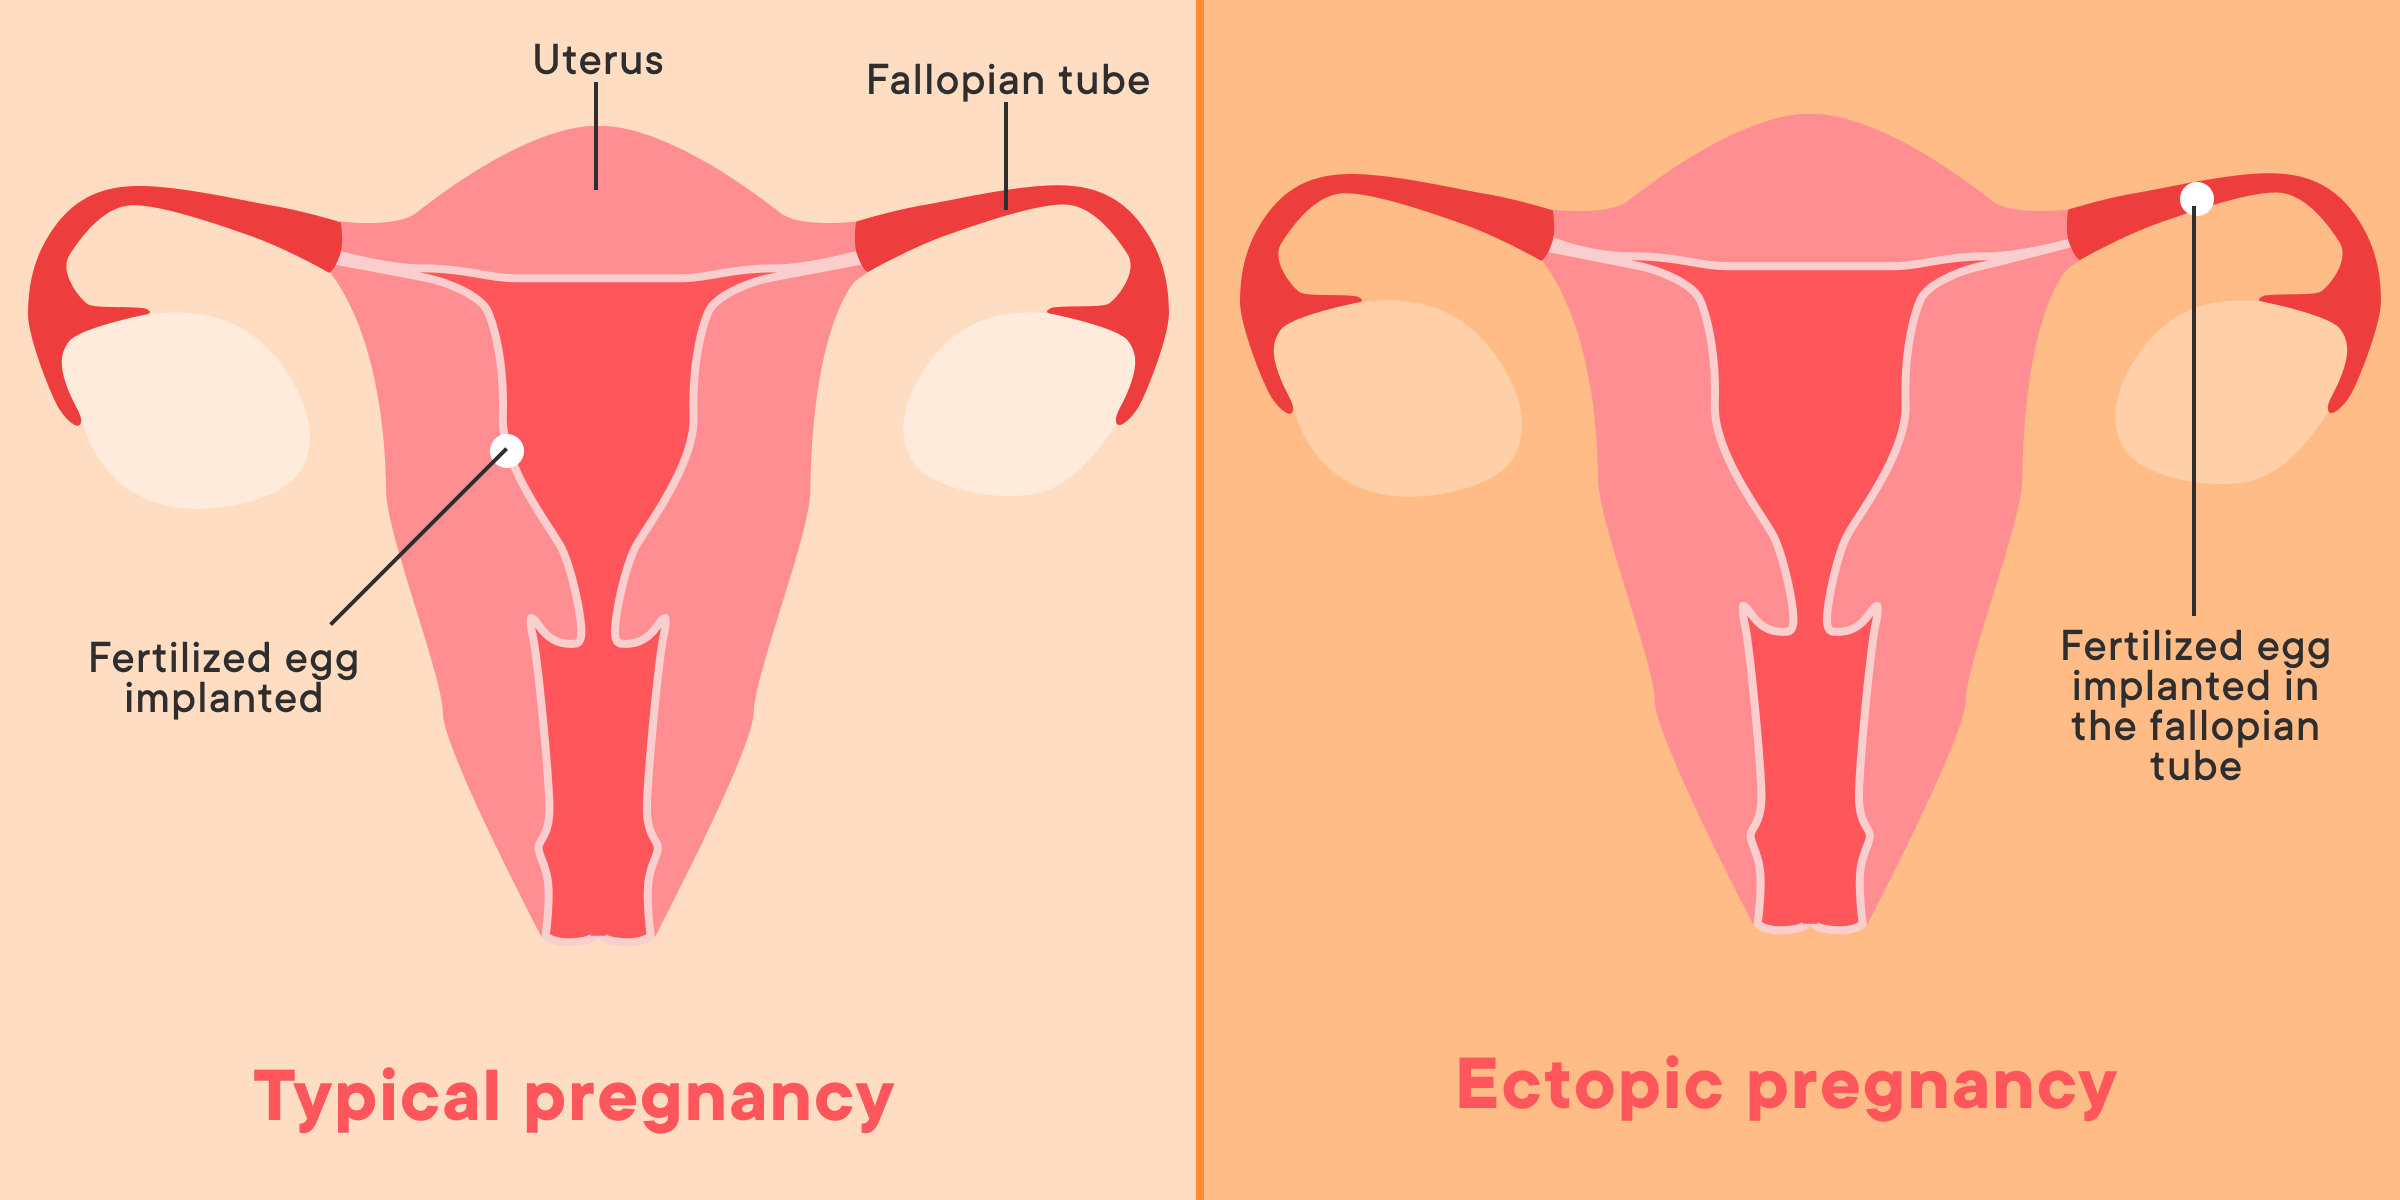 Ectopic pregnancy is rare. Here's what you need to know.